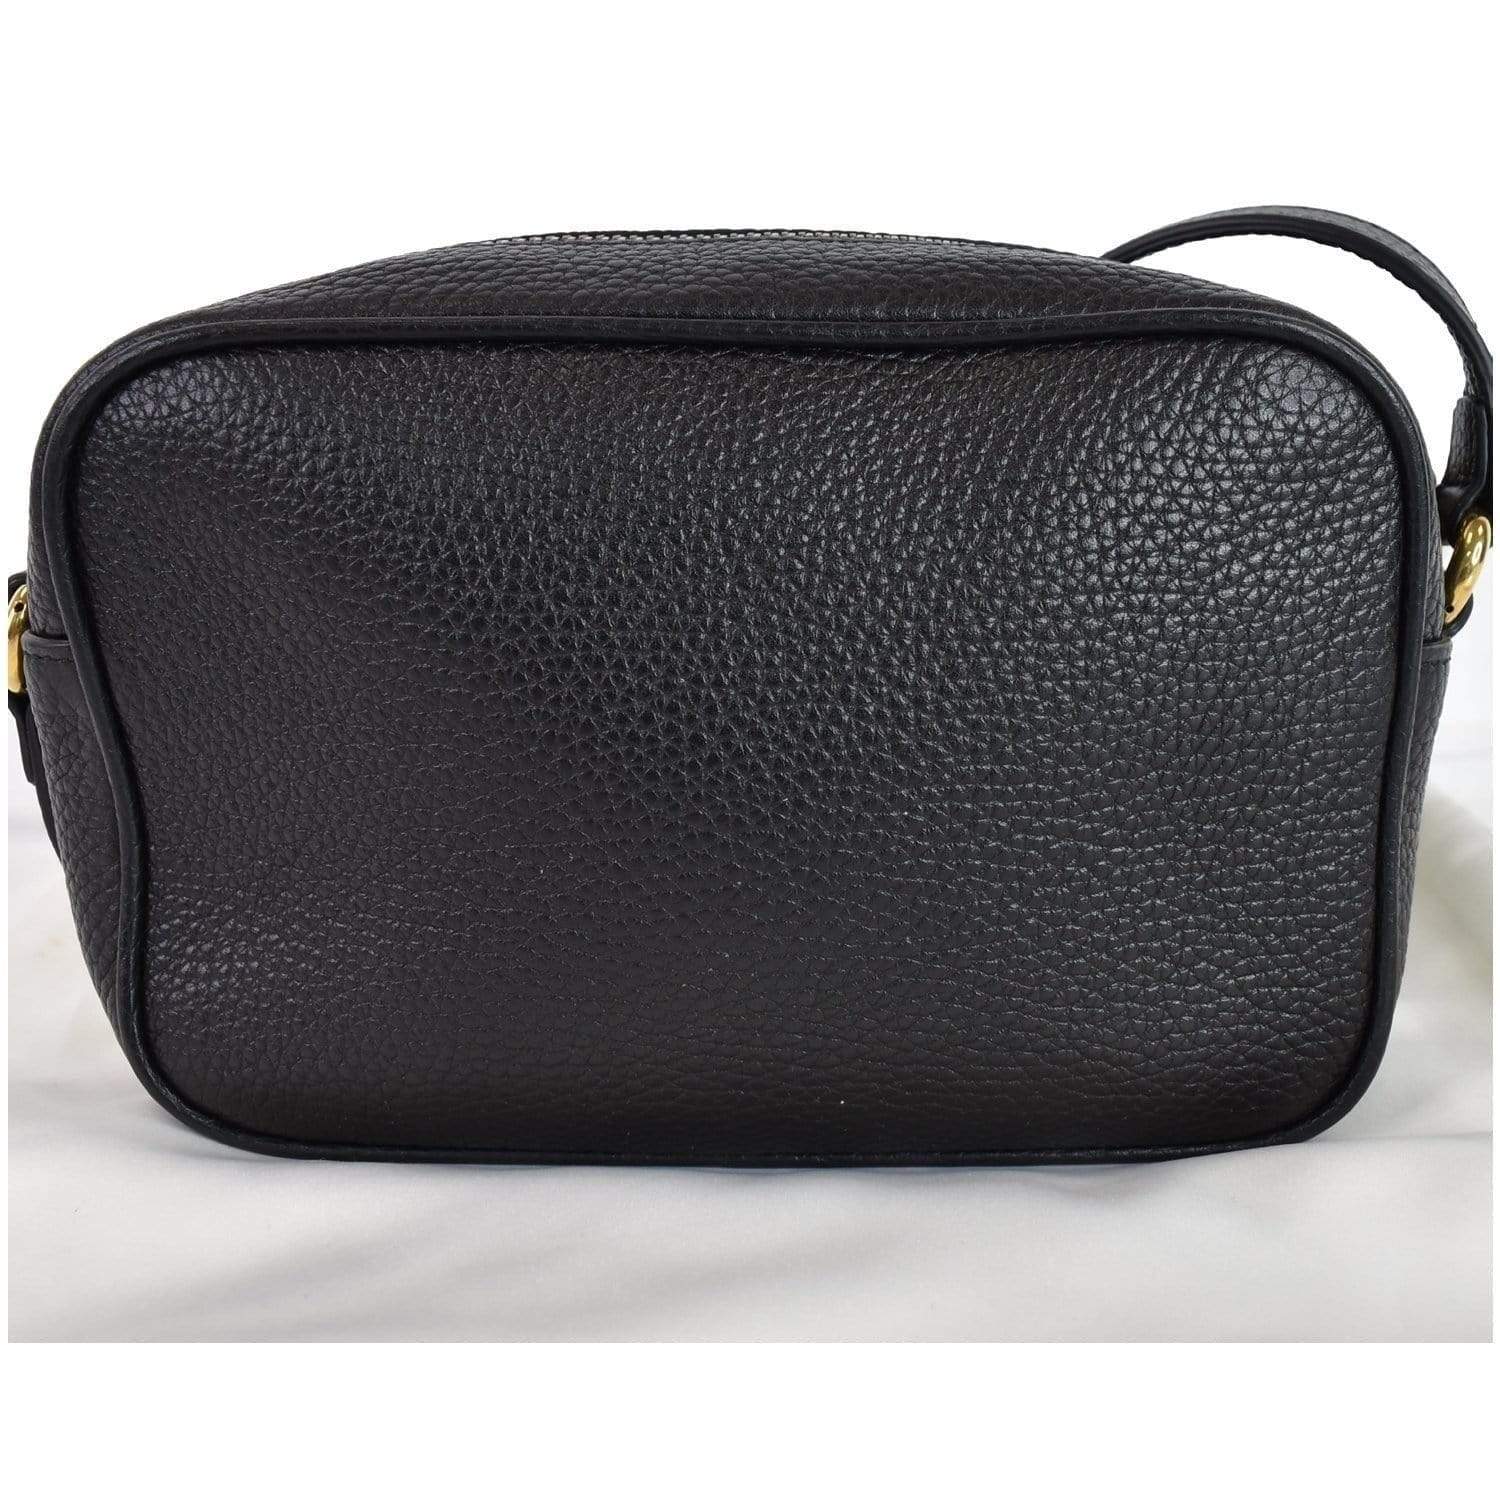 Louis Vuitton Soho Disco Small Pebbled Leather Bag - DDH